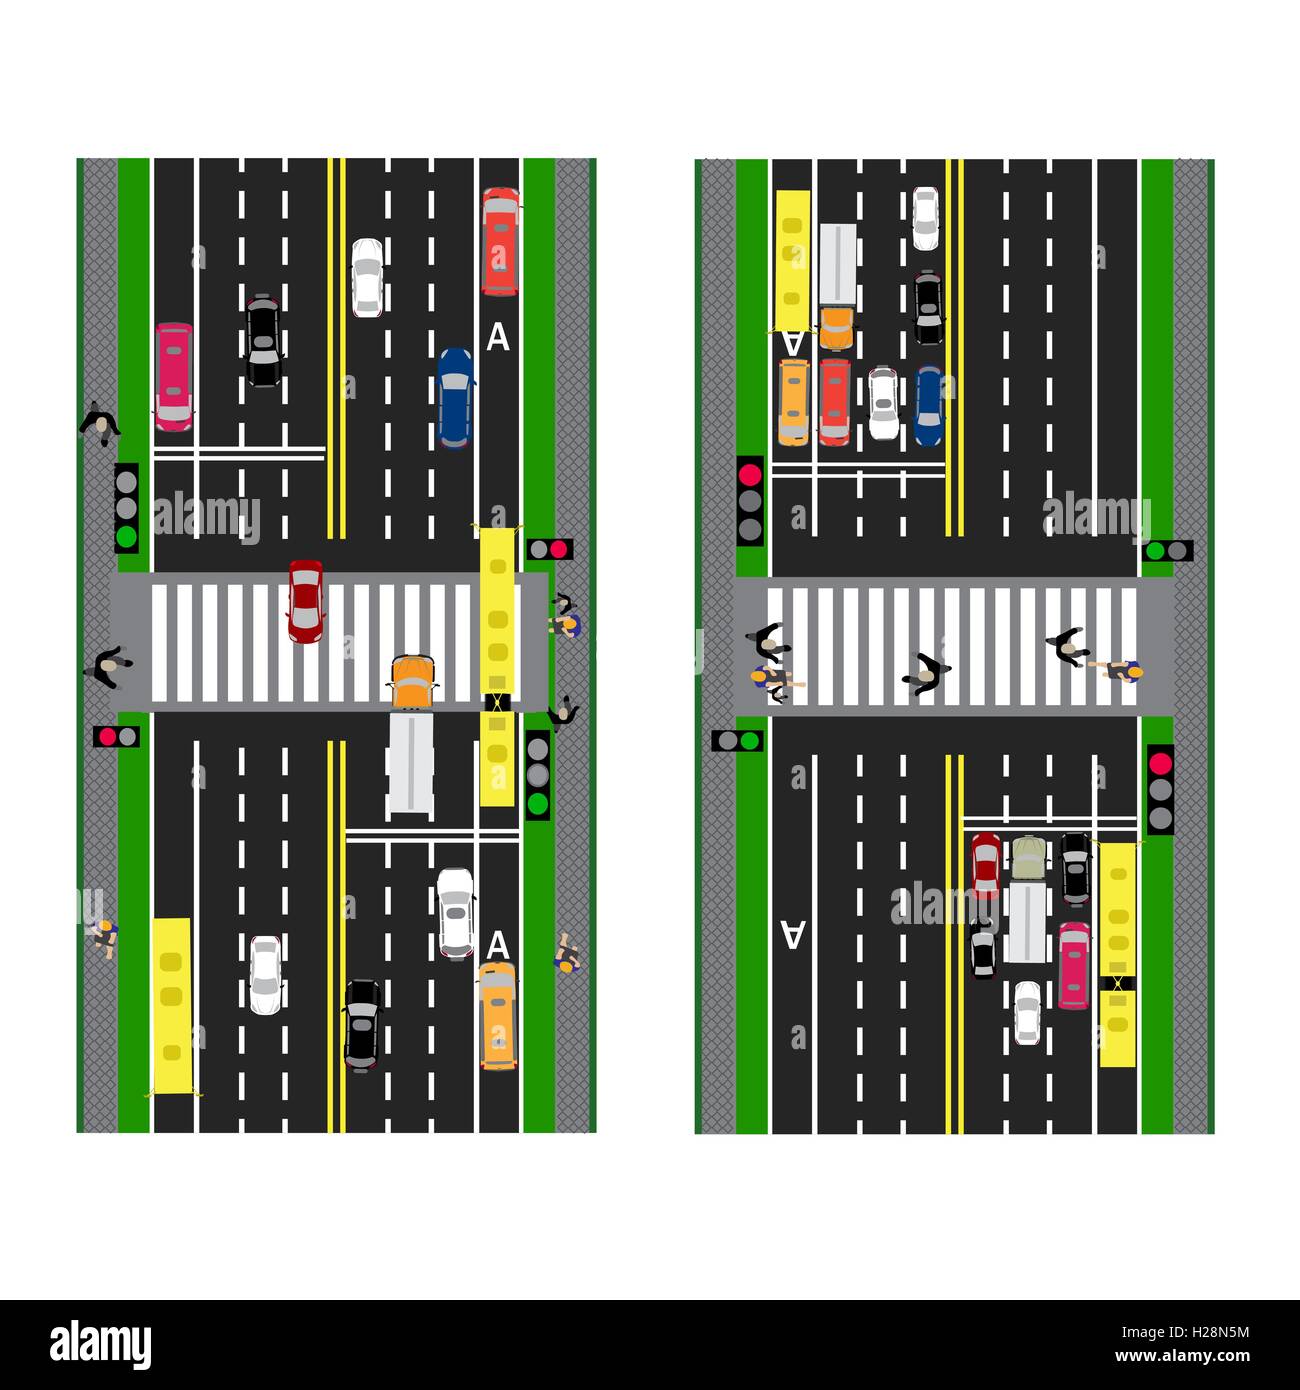 Highway Planning. roads, streets and traffic lights with the transition. Image sidewalks, transition lanes for public transport. View from above. illustration Stock Vector